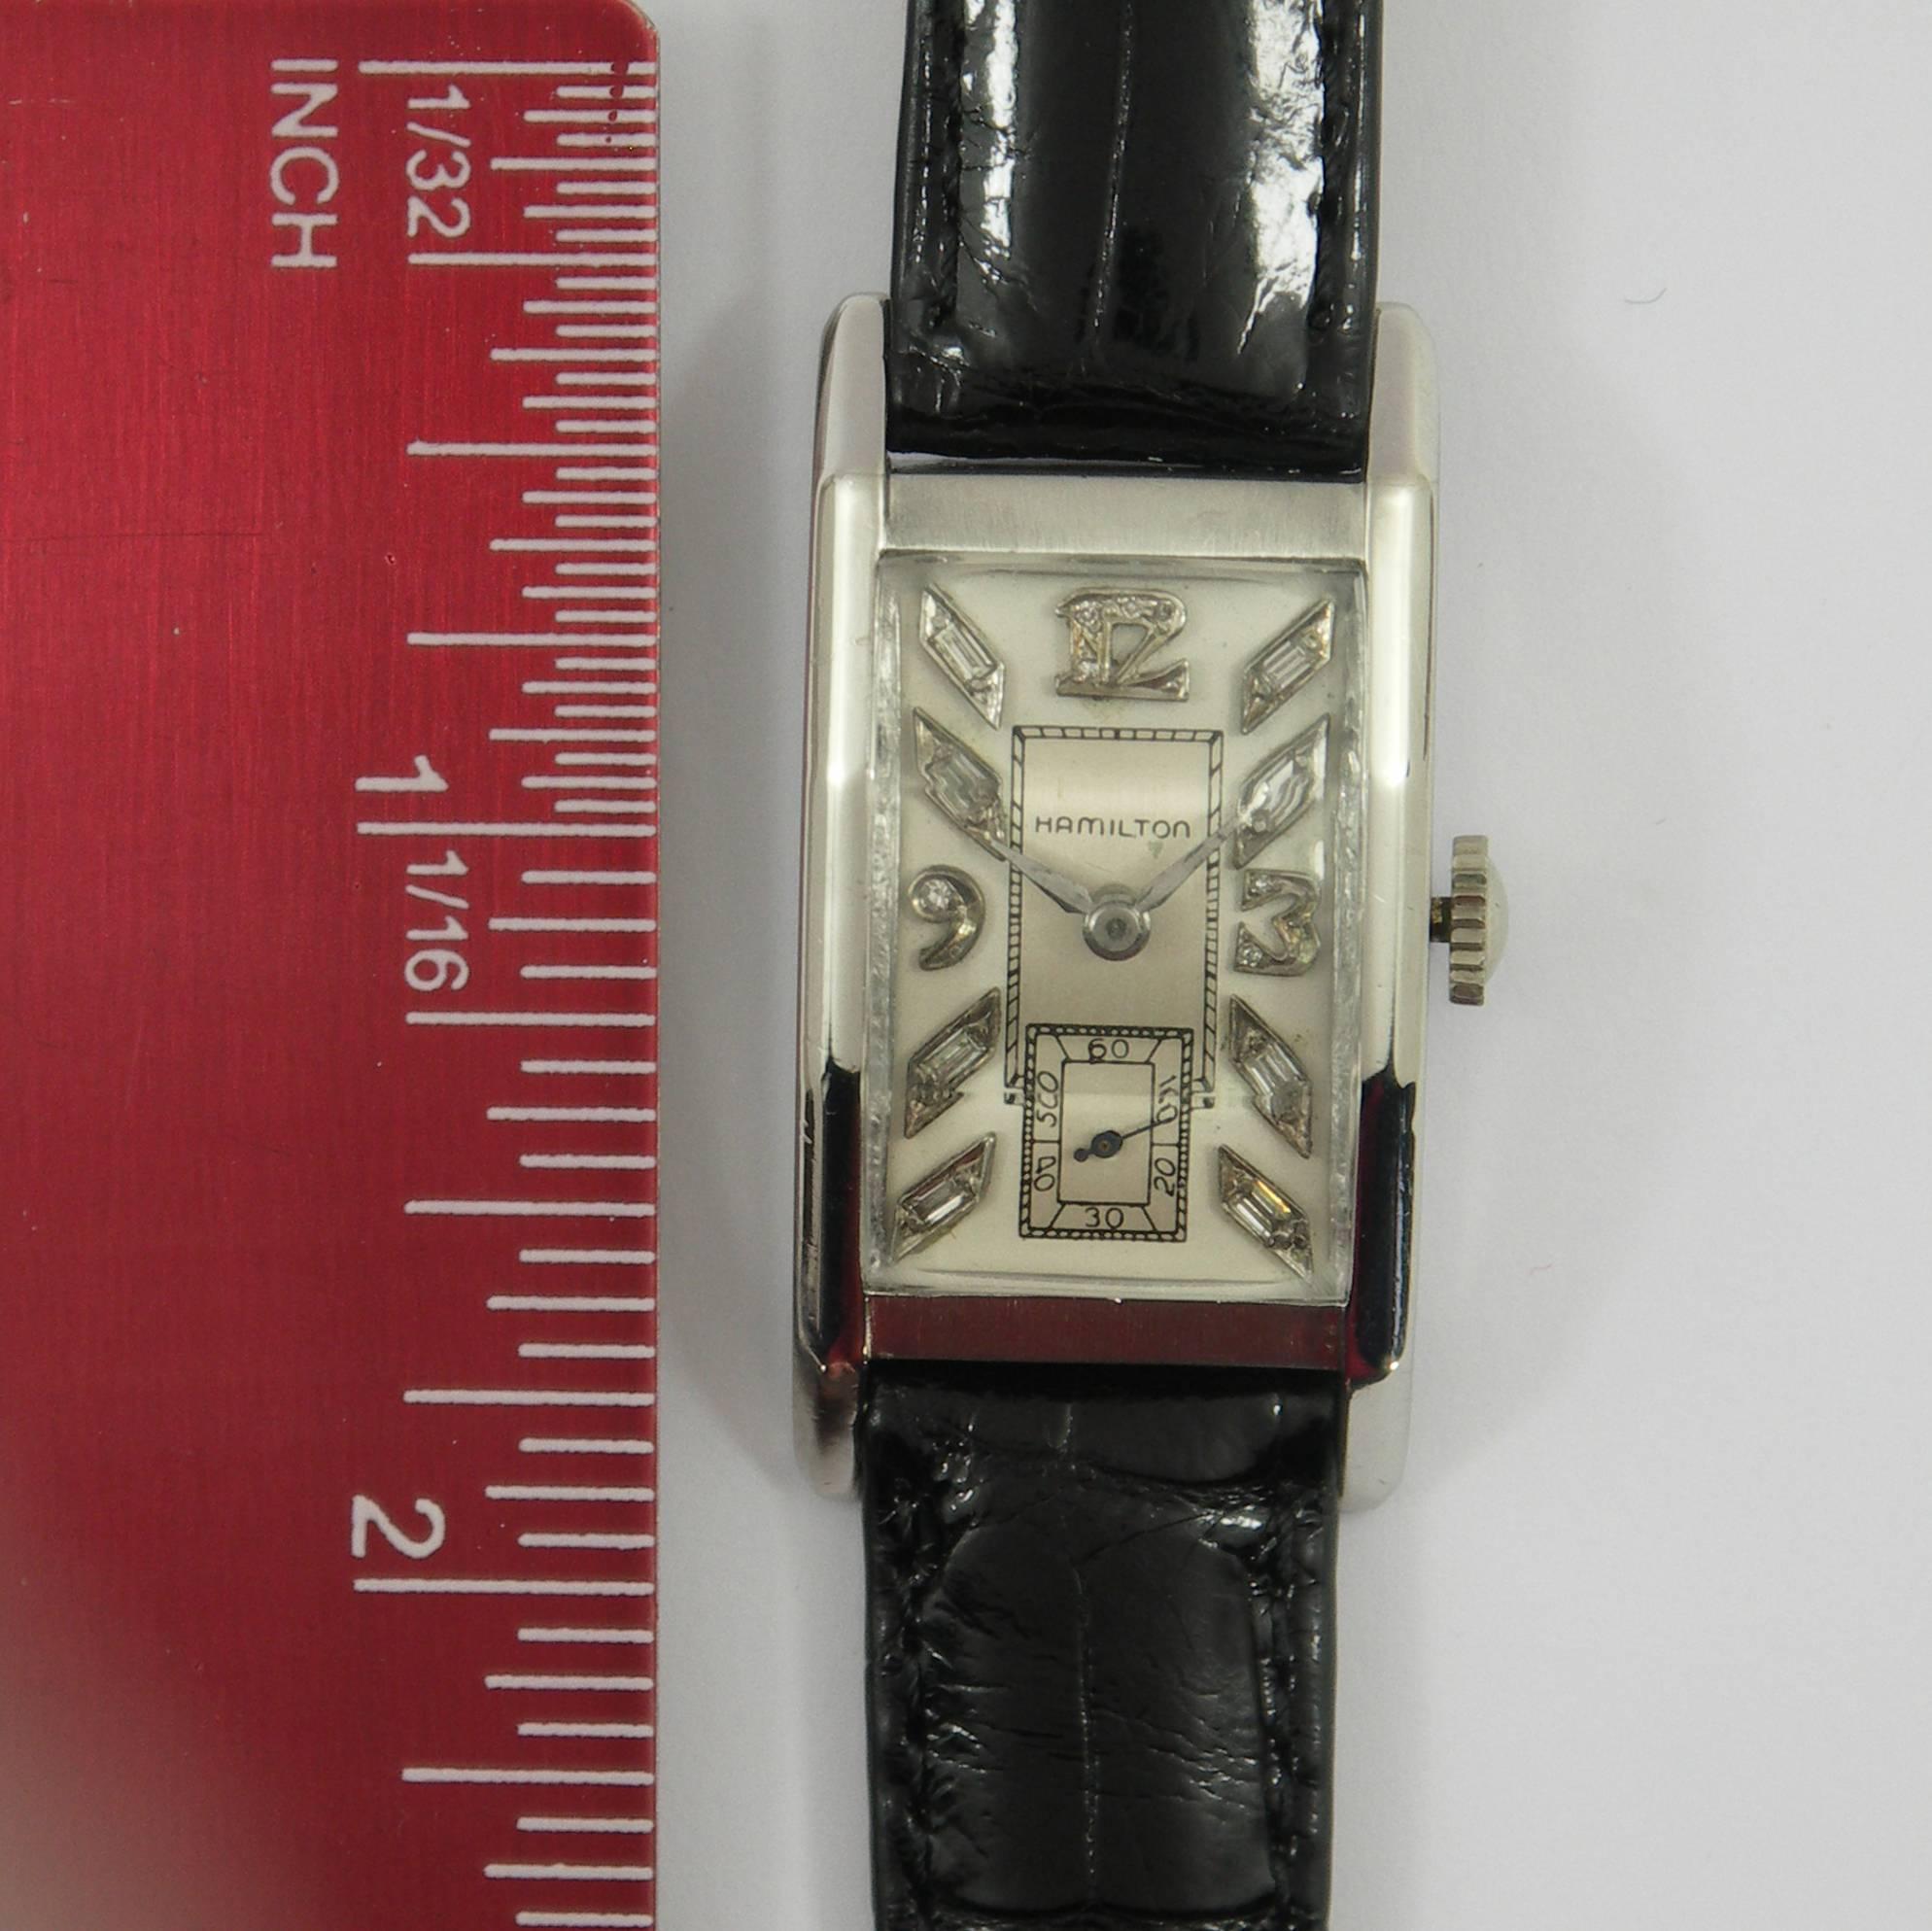 A classic Platinum wristwatch by Hamilton, with a case measuring 35mm X 20mm, and an Art Deco Dial with Diamond markers and numbers. Watch features a new, black, American alligator band with white metal buckle.  